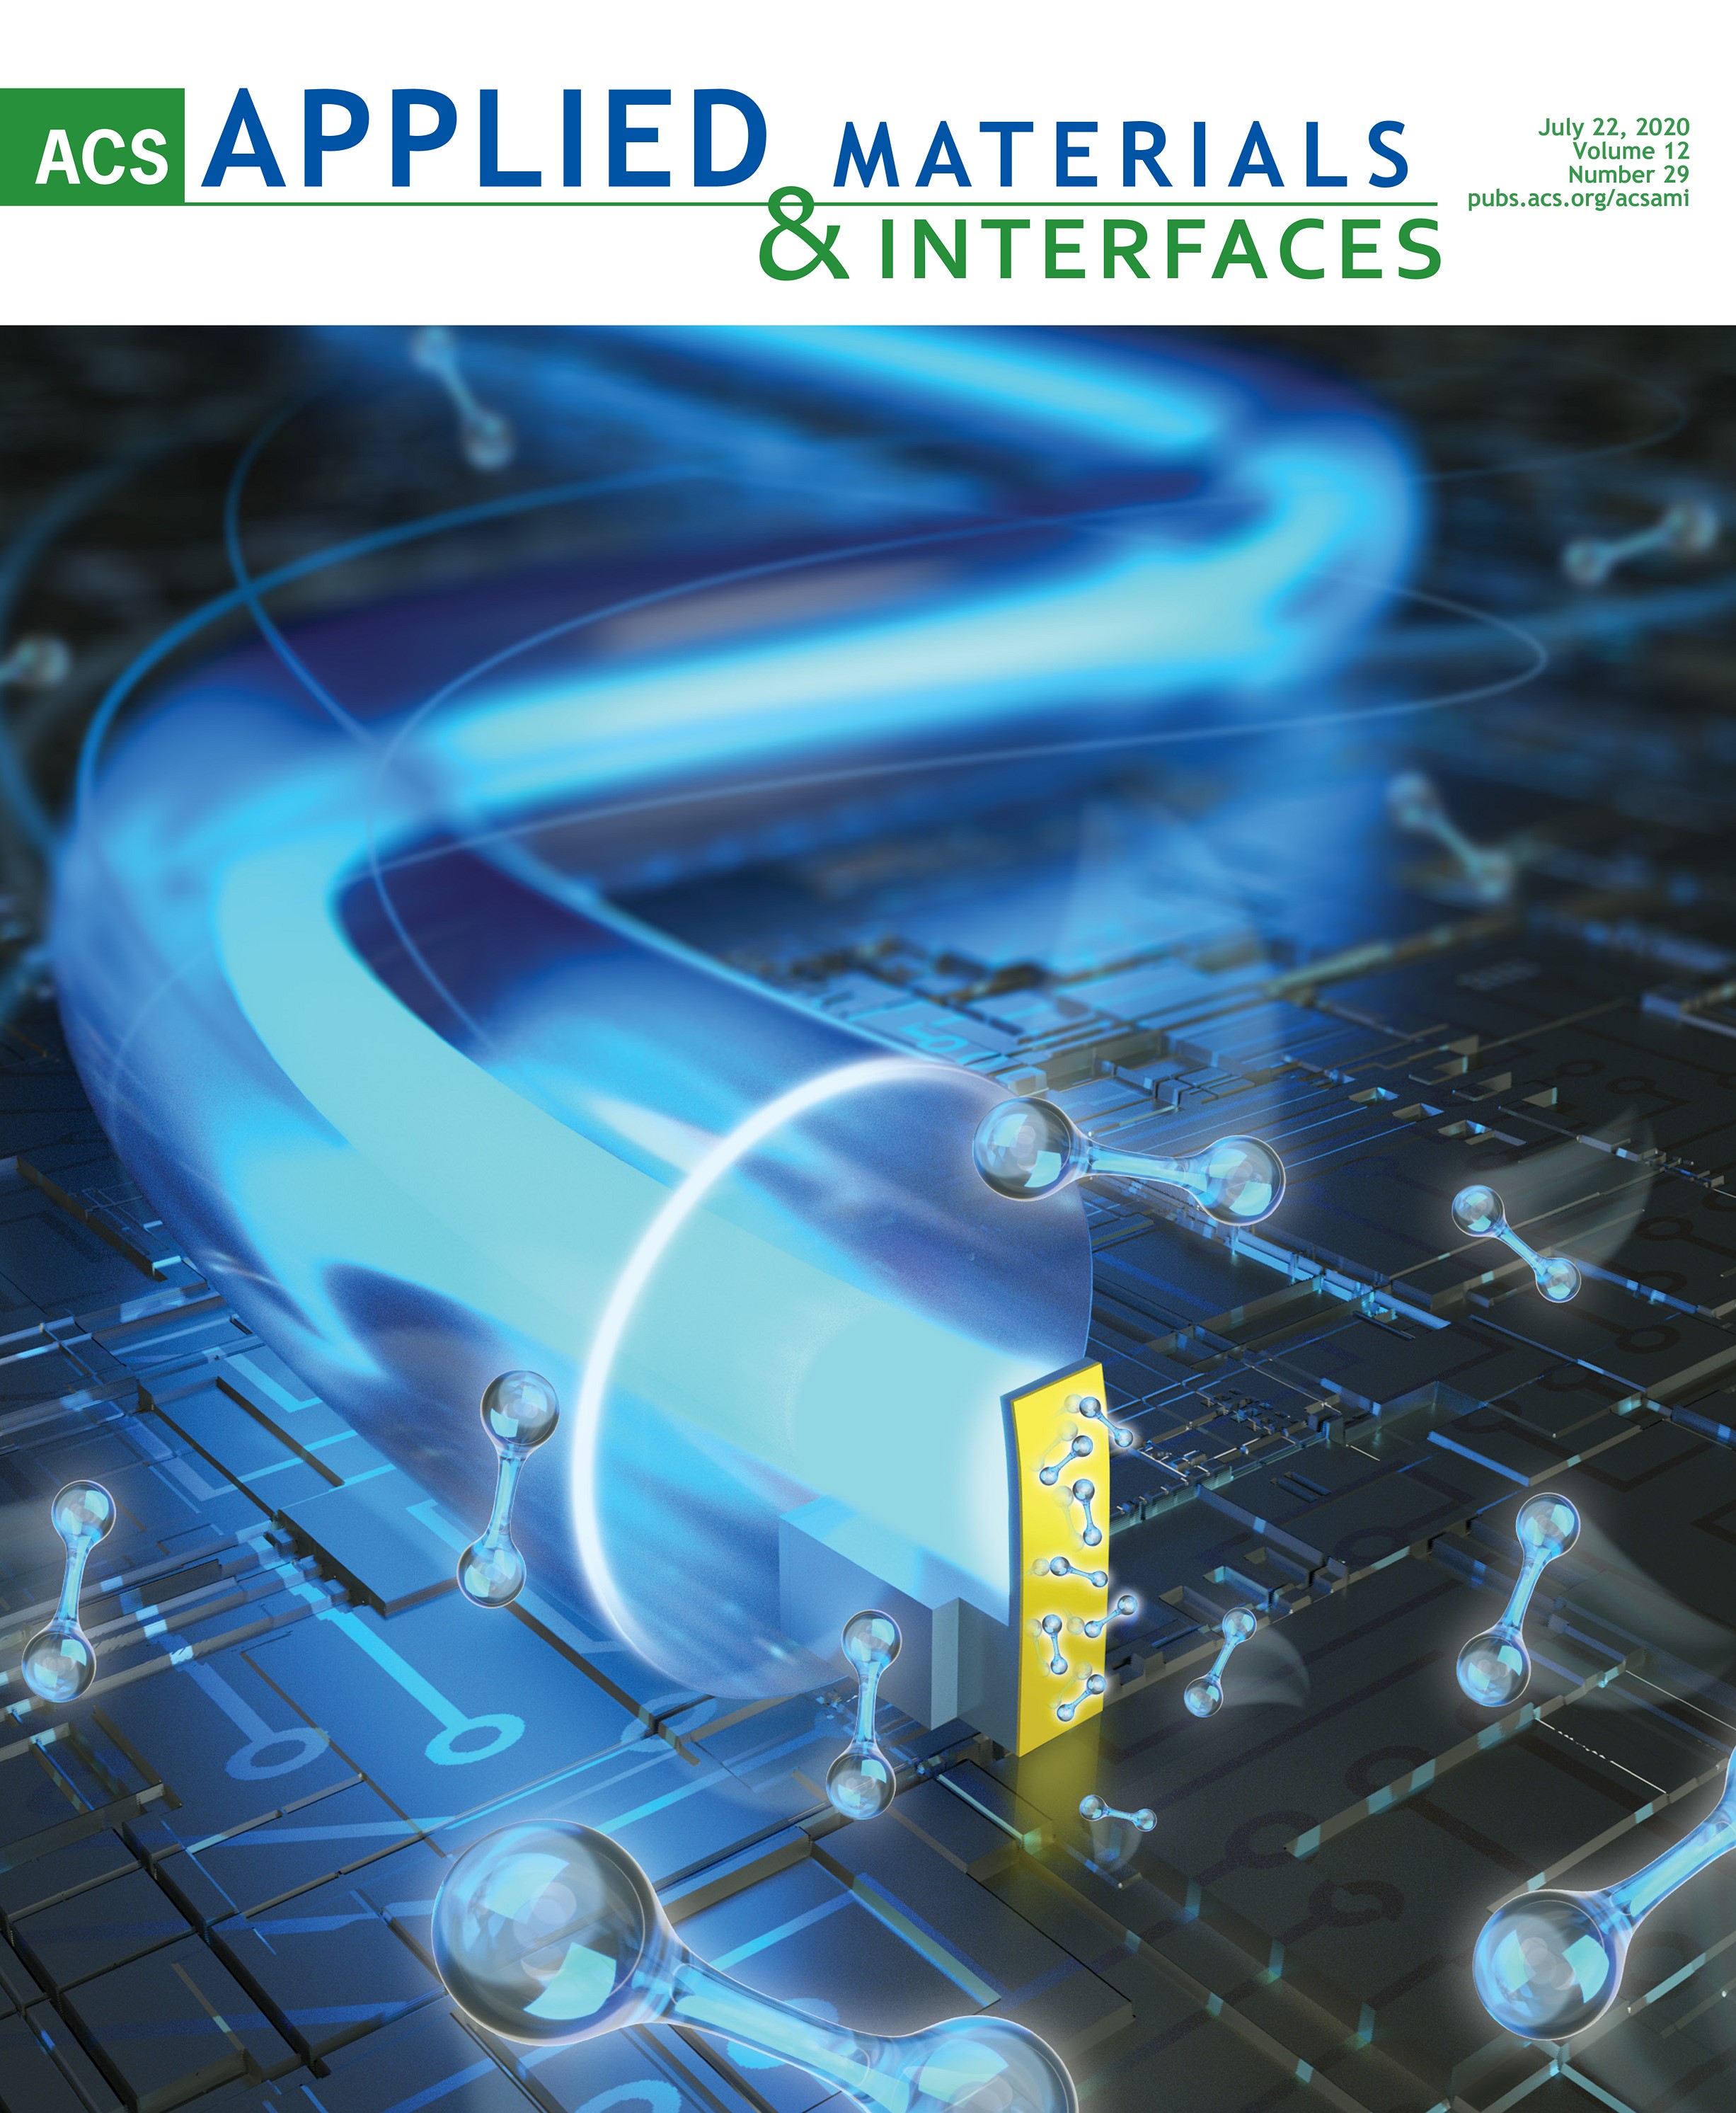 Research Creative Illustration, Journal Cover Art Design, ACS Applied Materials & Interfaces